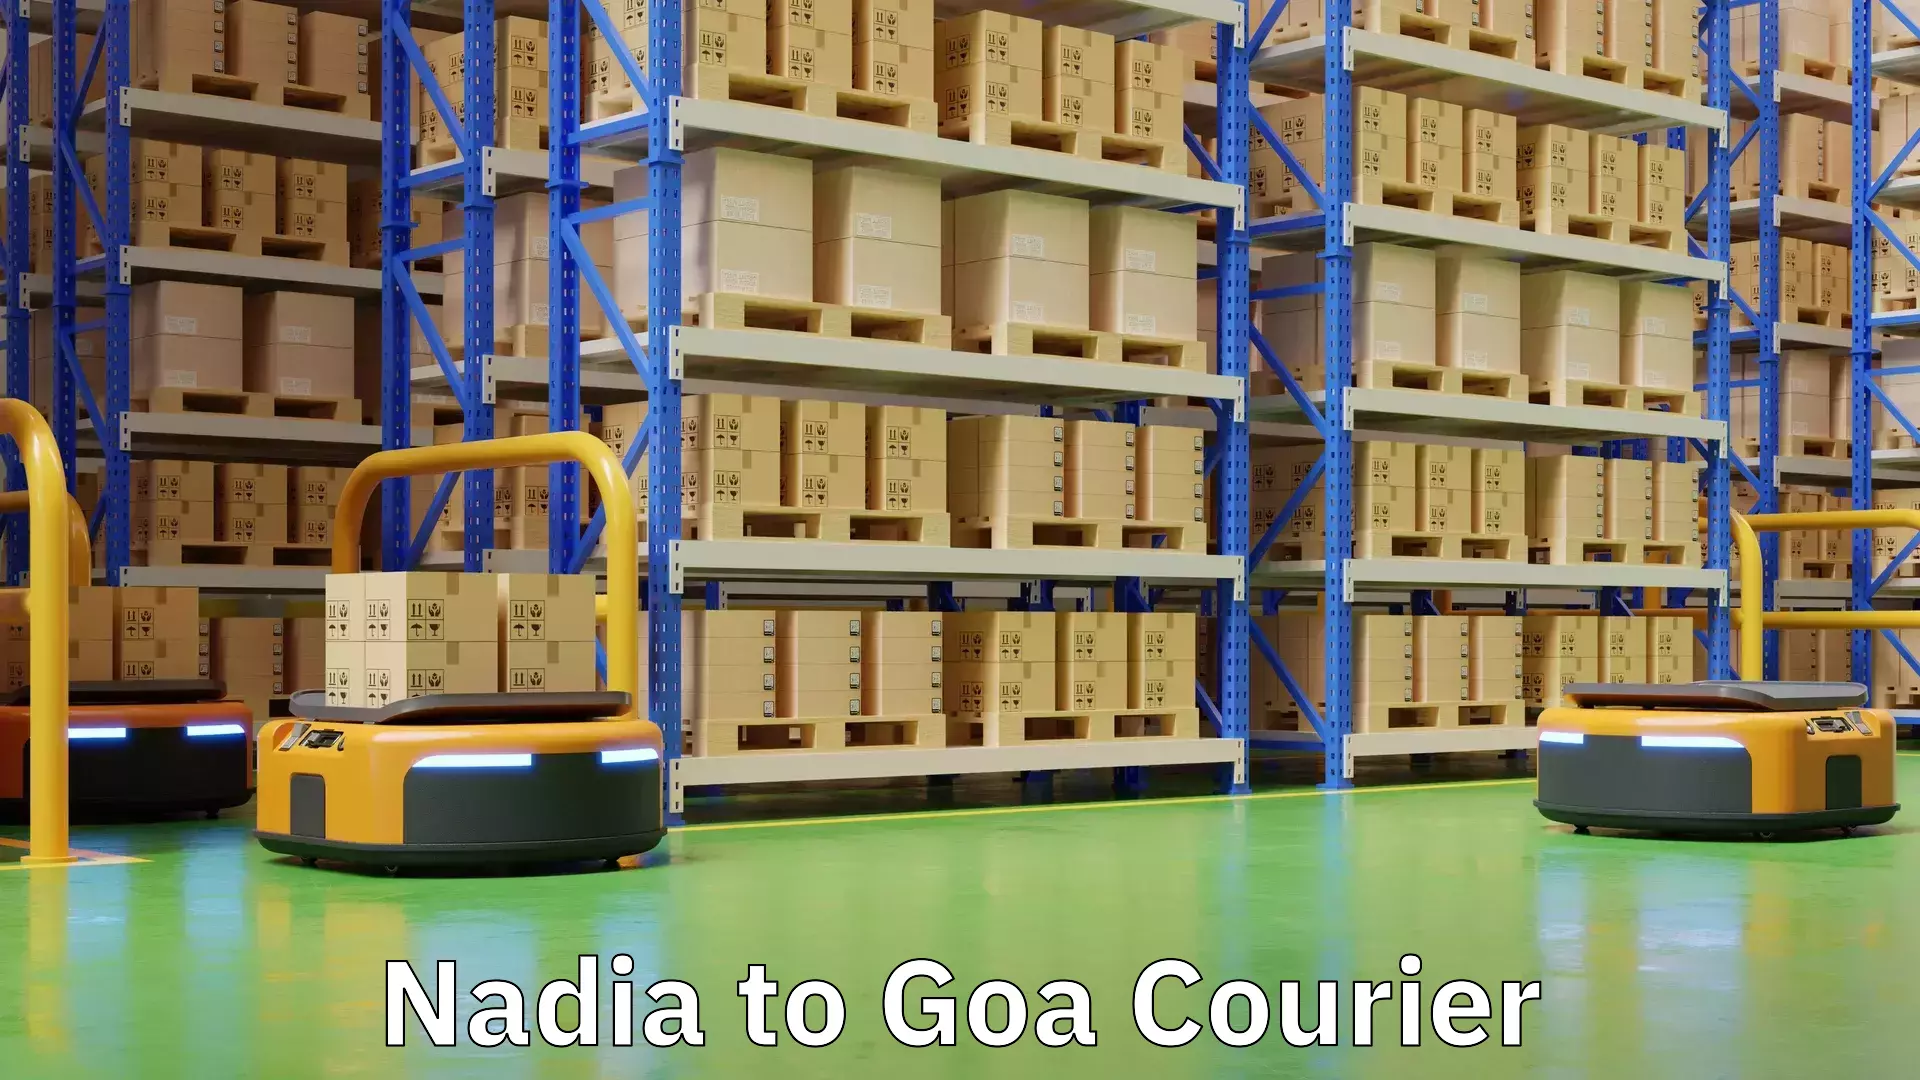 Business delivery service Nadia to Goa